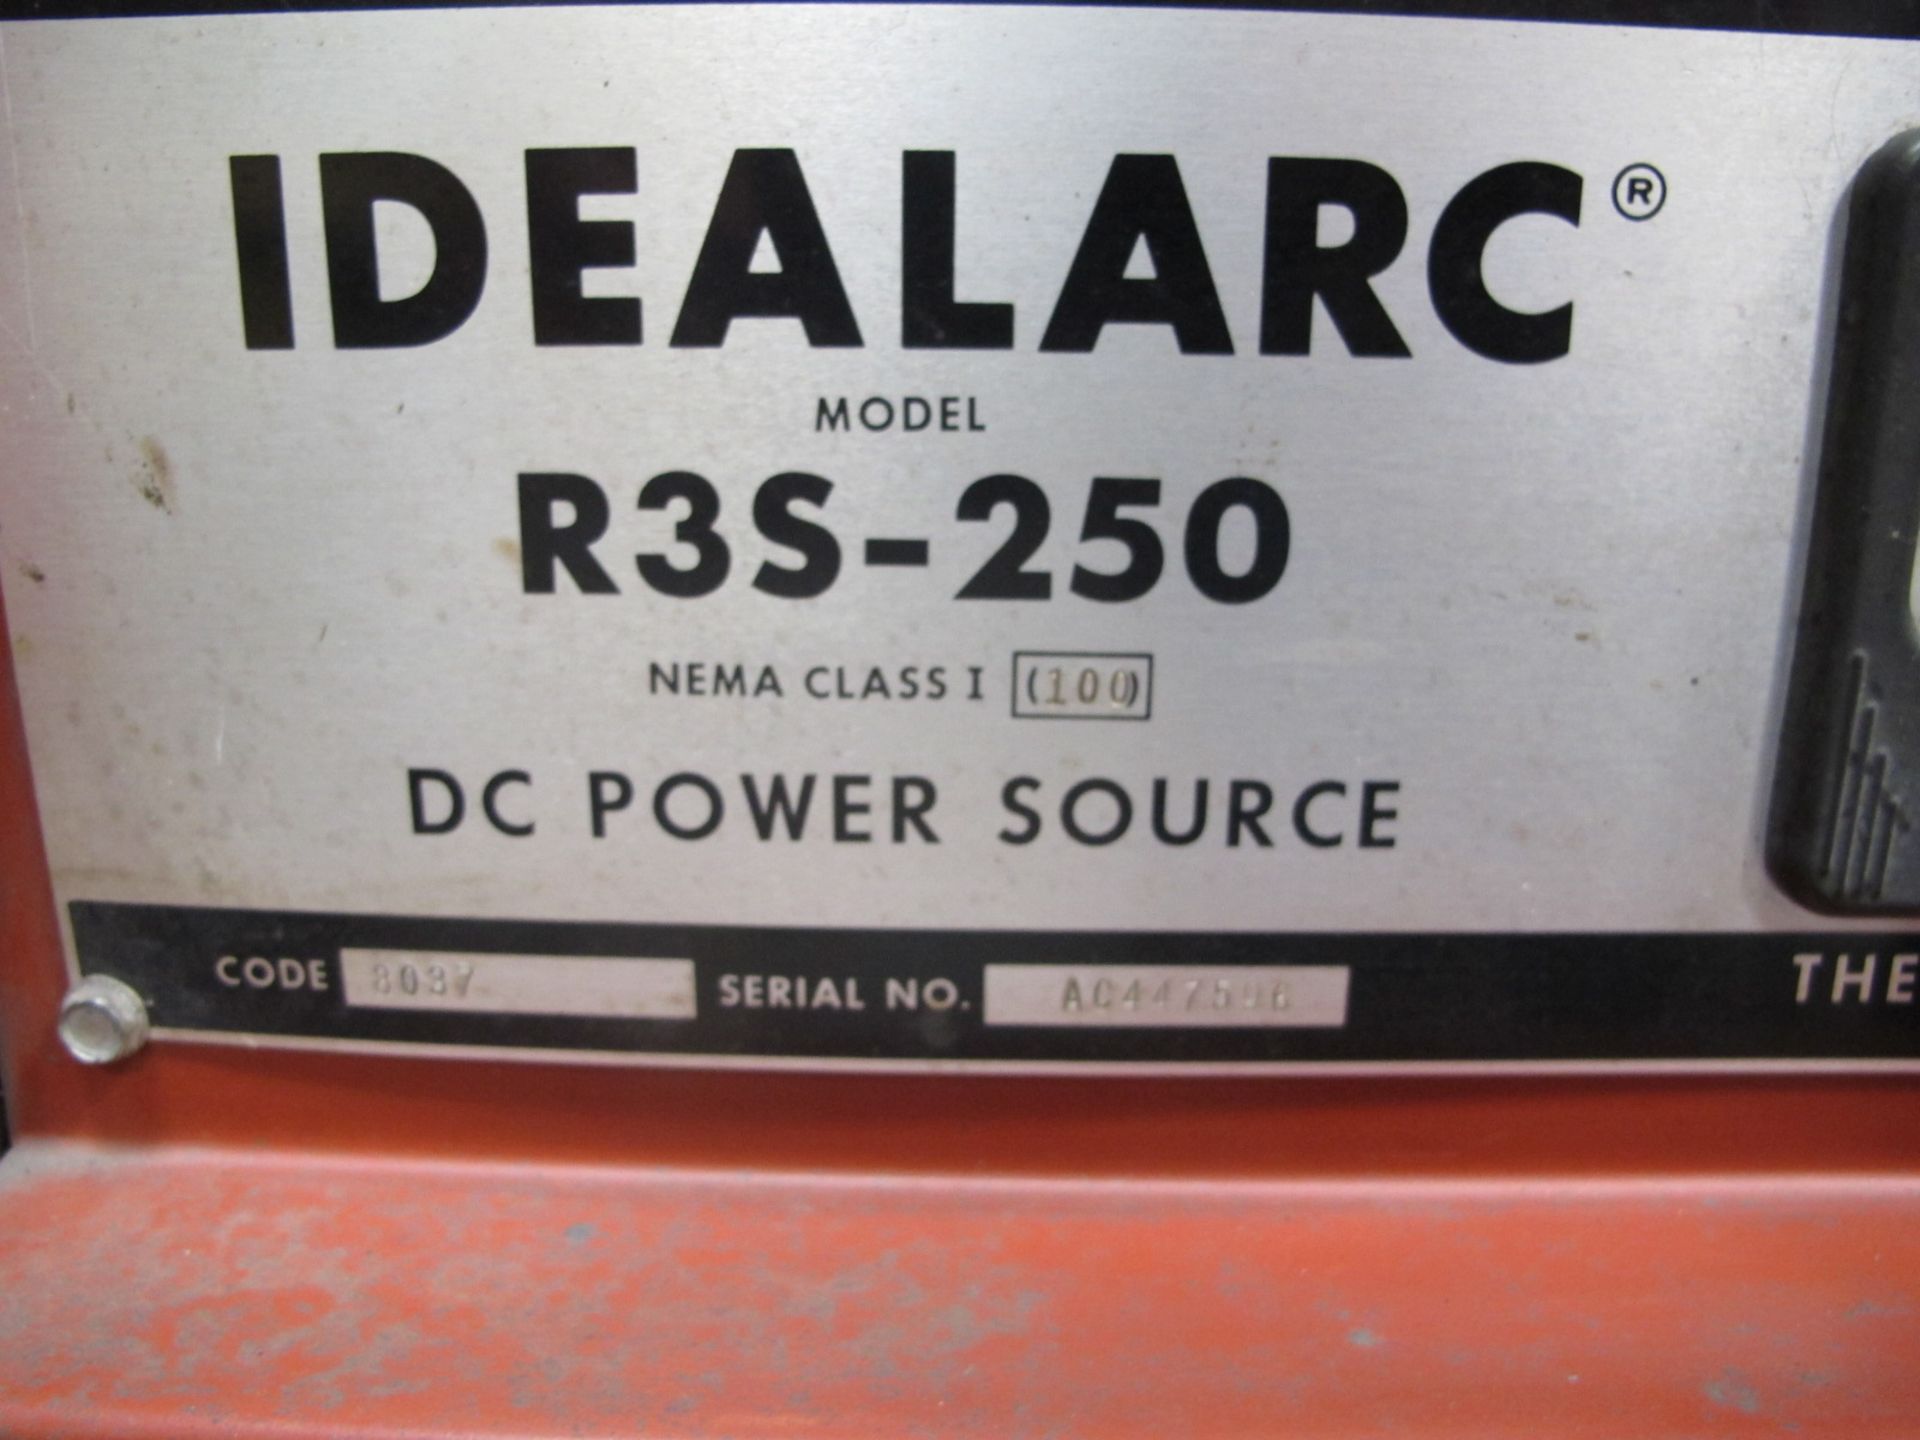 Lincoln Idealarc R3S-250 CV-DC Arc Welding Power Source s/n AC447596 w/ Lincoln LN-7 Wire Feeder - Image 2 of 2